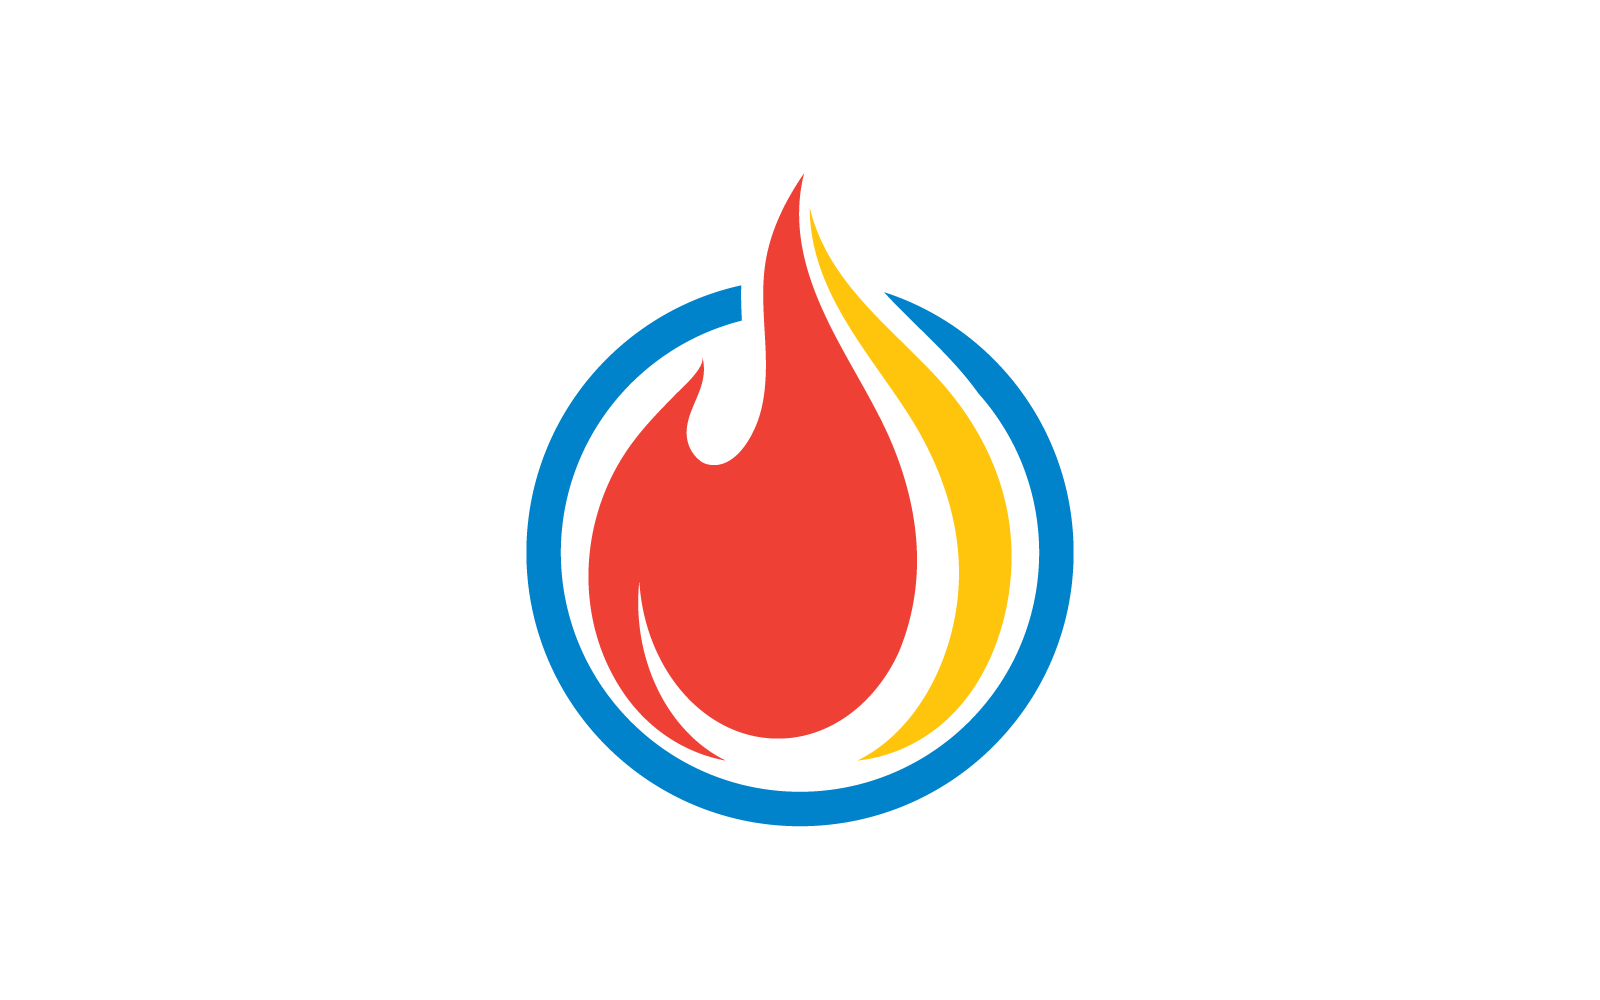 Fire flame Oil, gas and energy design logo concept